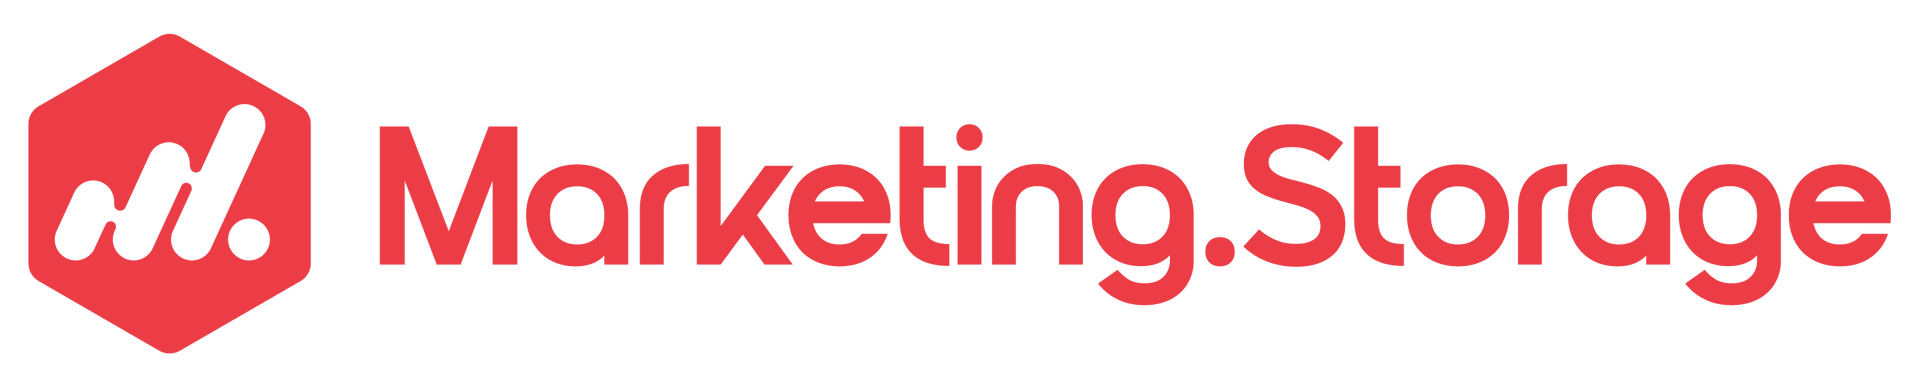 The logo for marketing storage is red and white.